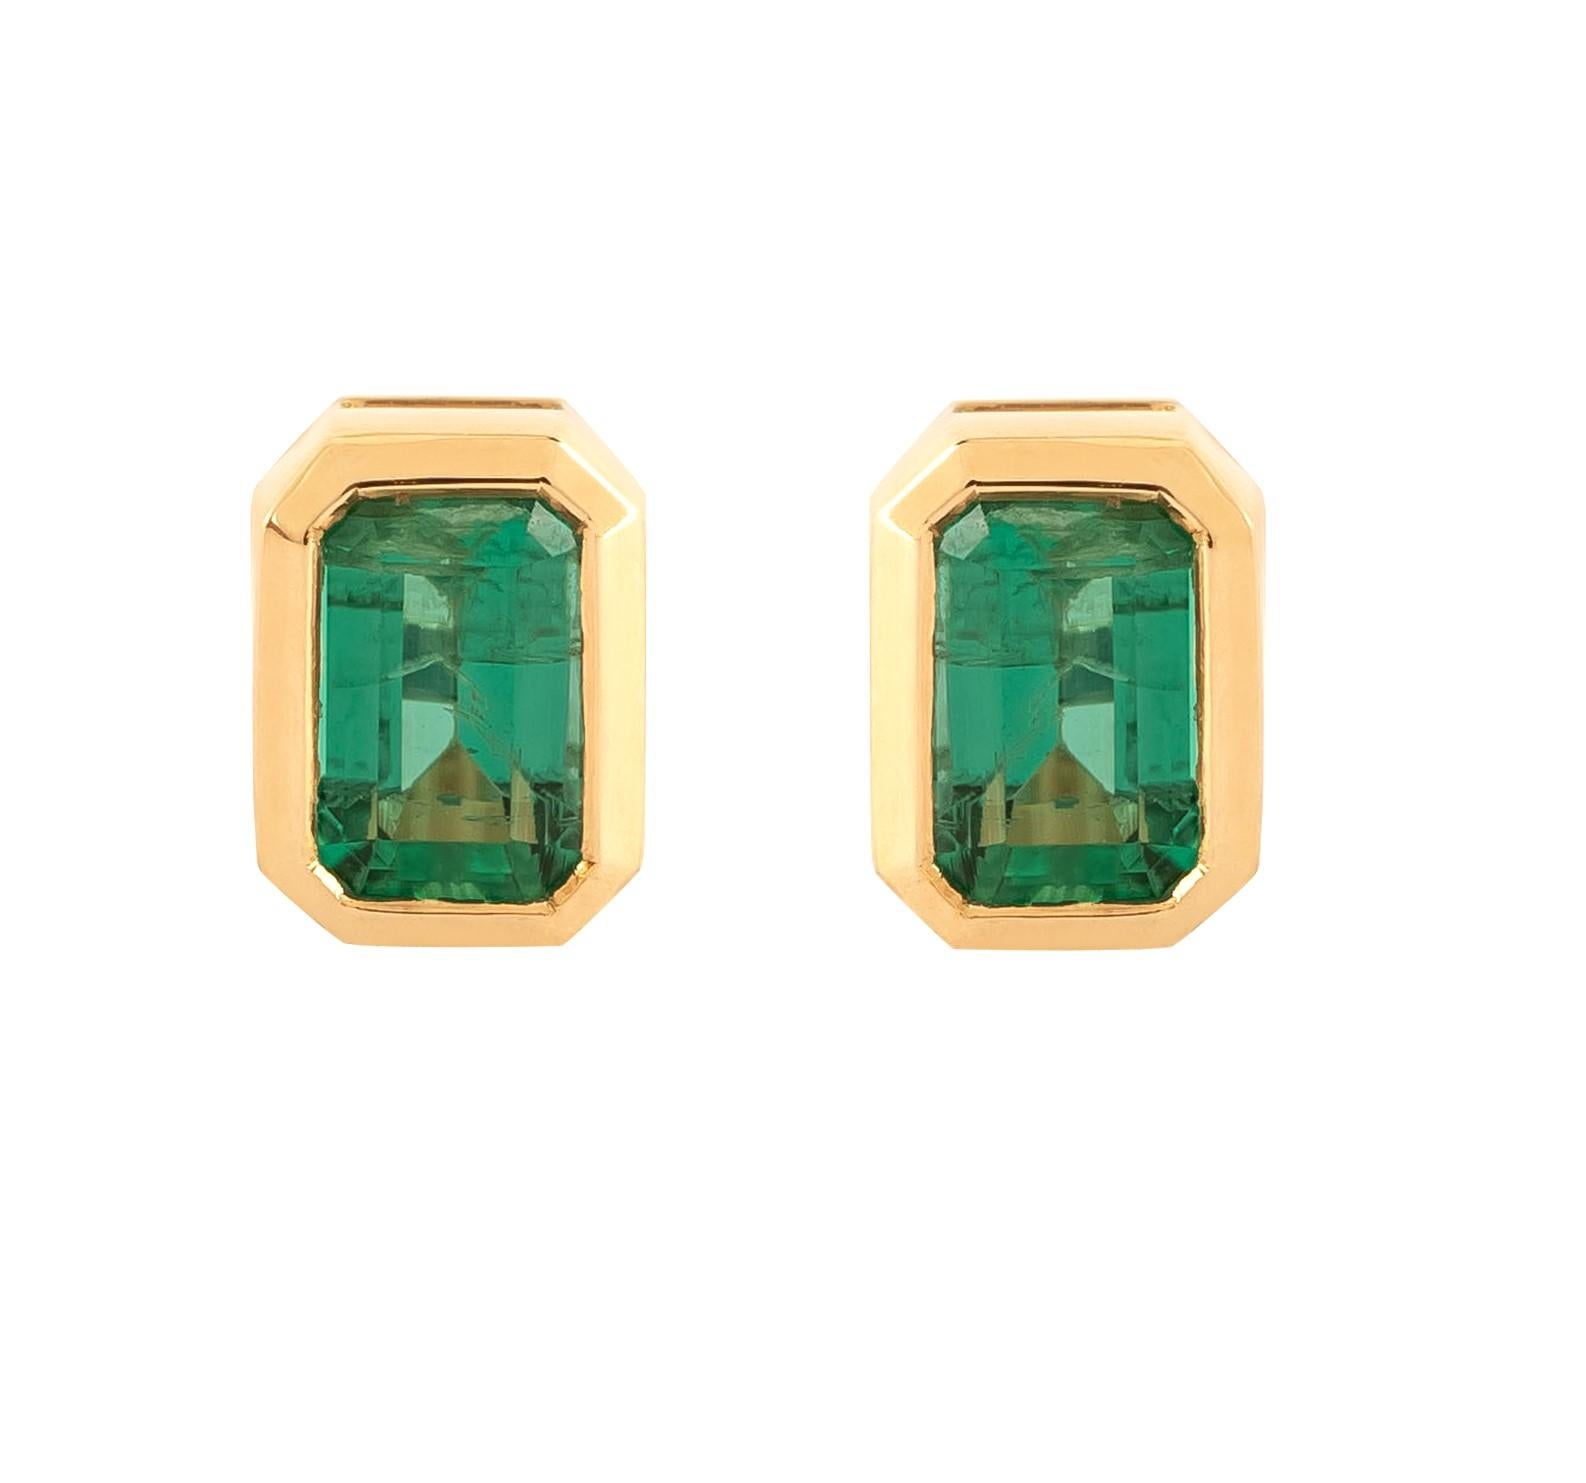 Explore the captivating elegance of our 18 Karat Gold 1.05 Carat Emerald Cocktail Stud Earrings. Each piece is a testament to meticulous craftsmanship and individual curation, effortlessly blending traditional artistry with contemporary